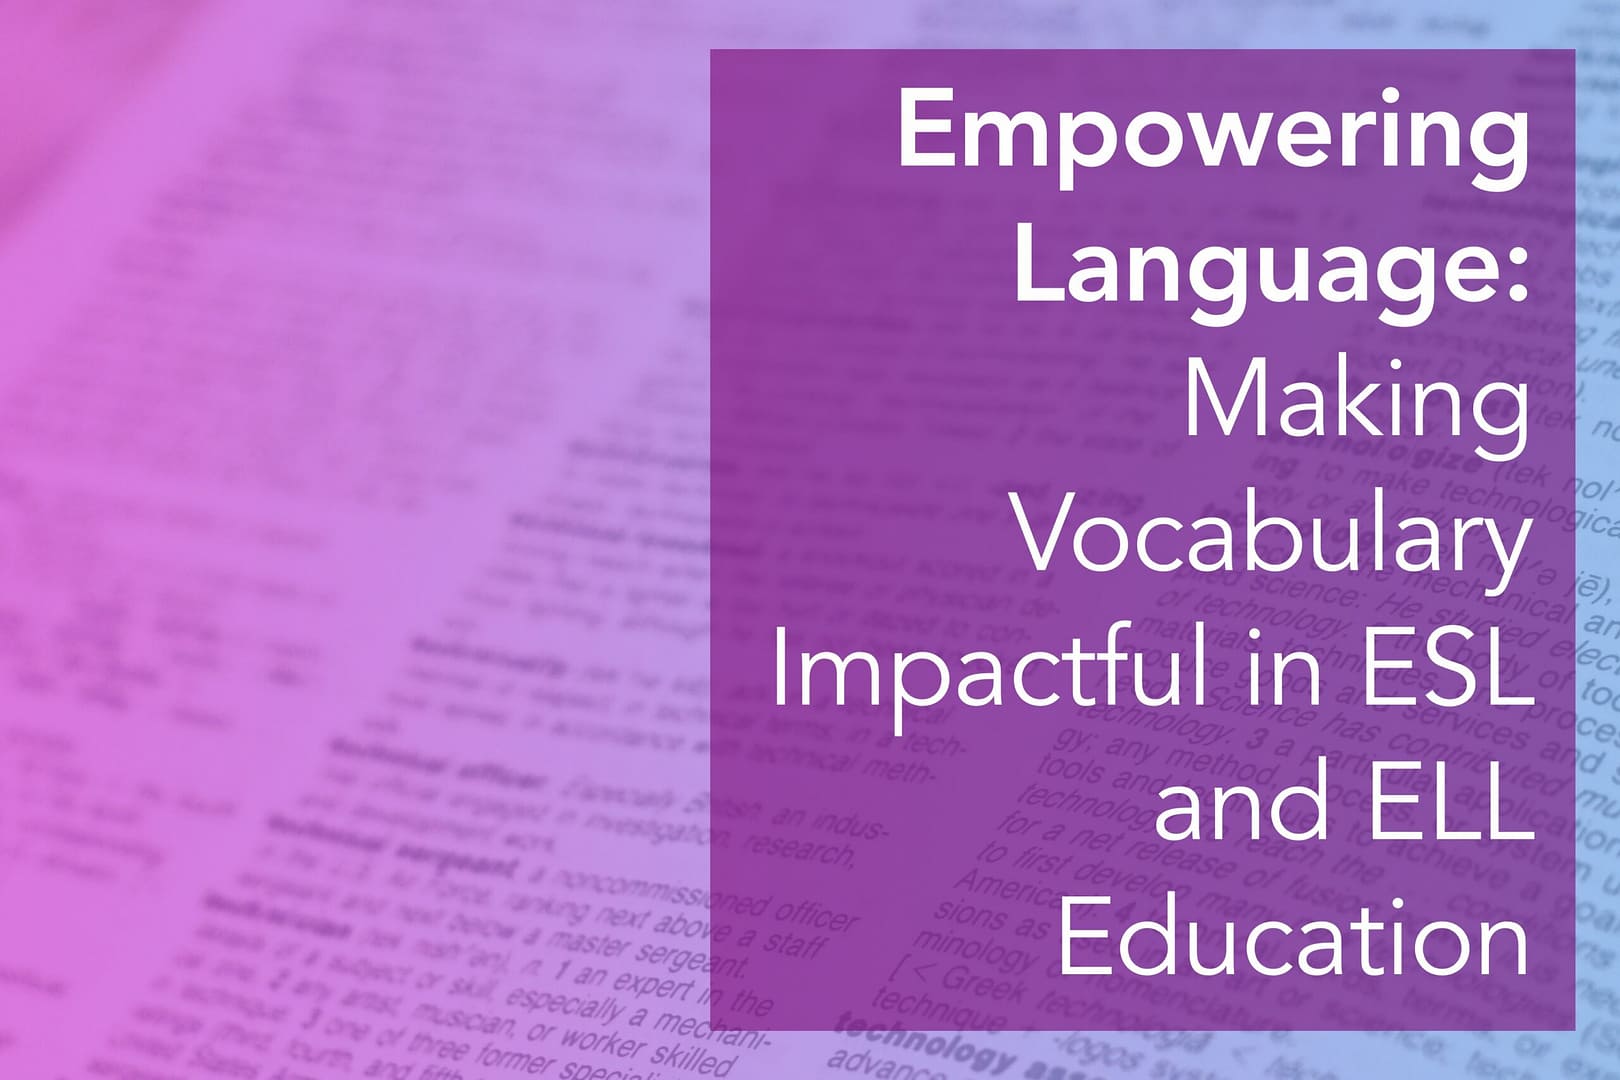 Empowering Language: Making Vocabulary Impactful in ESL and ELL Education